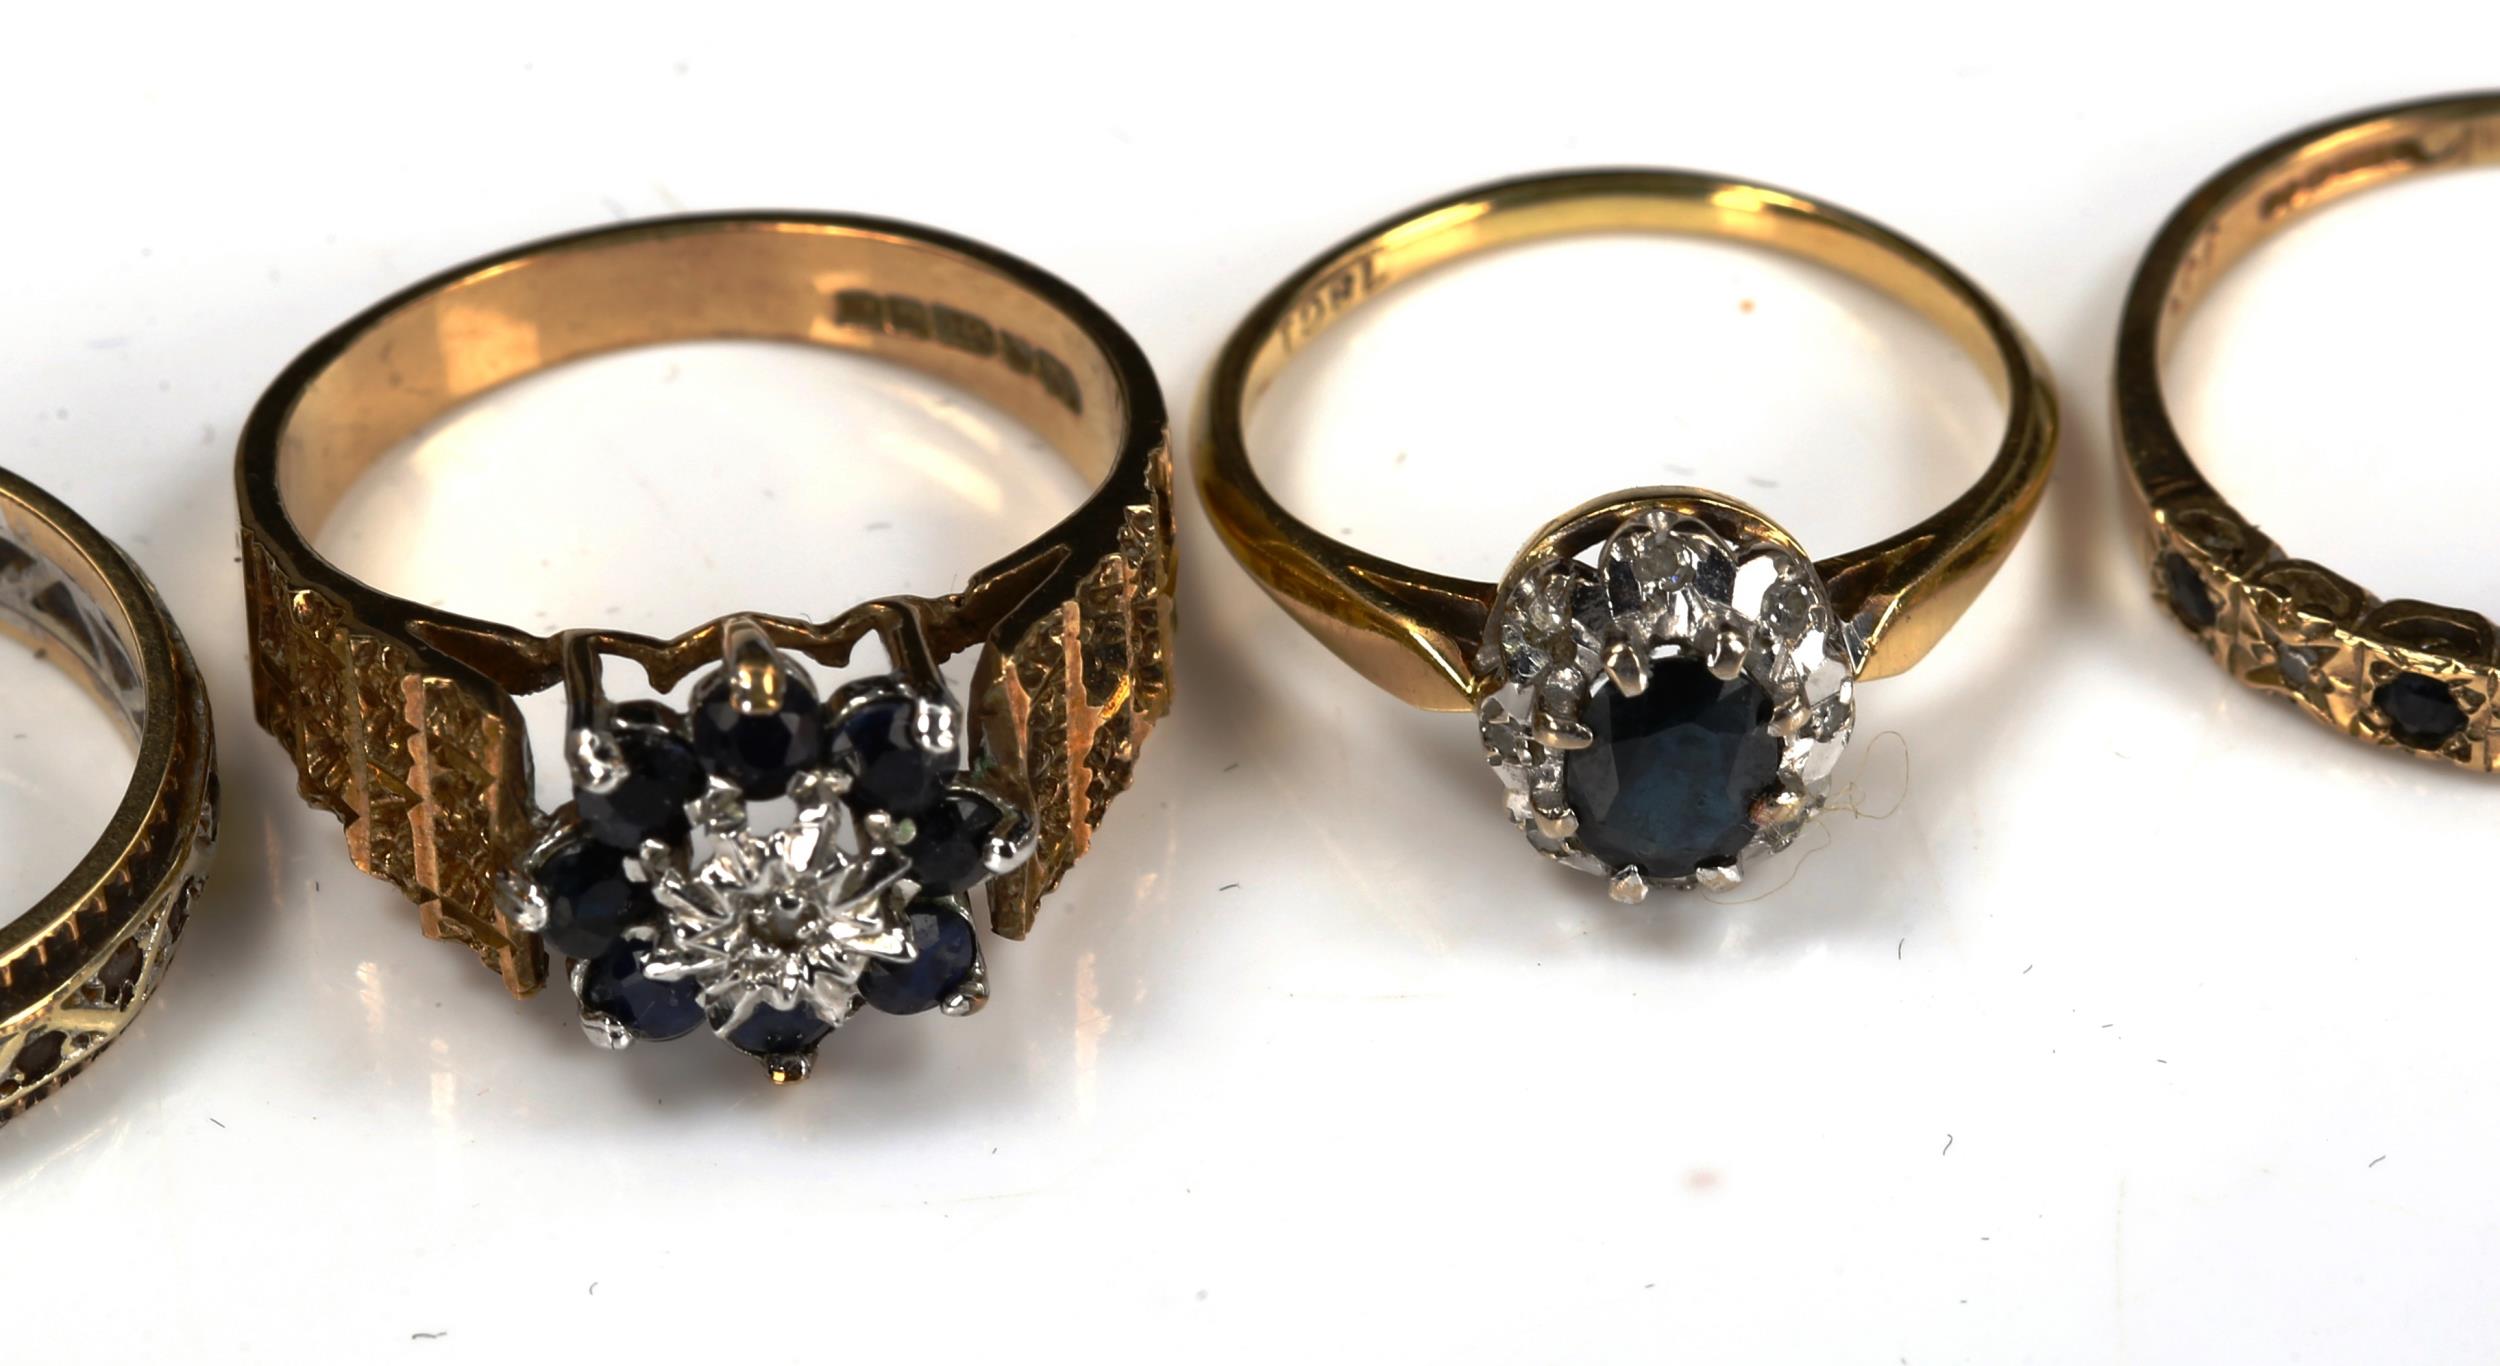 6 stone set rings, comprising 4 x 9ct (11g), 1 x 18ct (2.8g), and 1 x unmarked (3g) (6) No damage or - Image 2 of 4